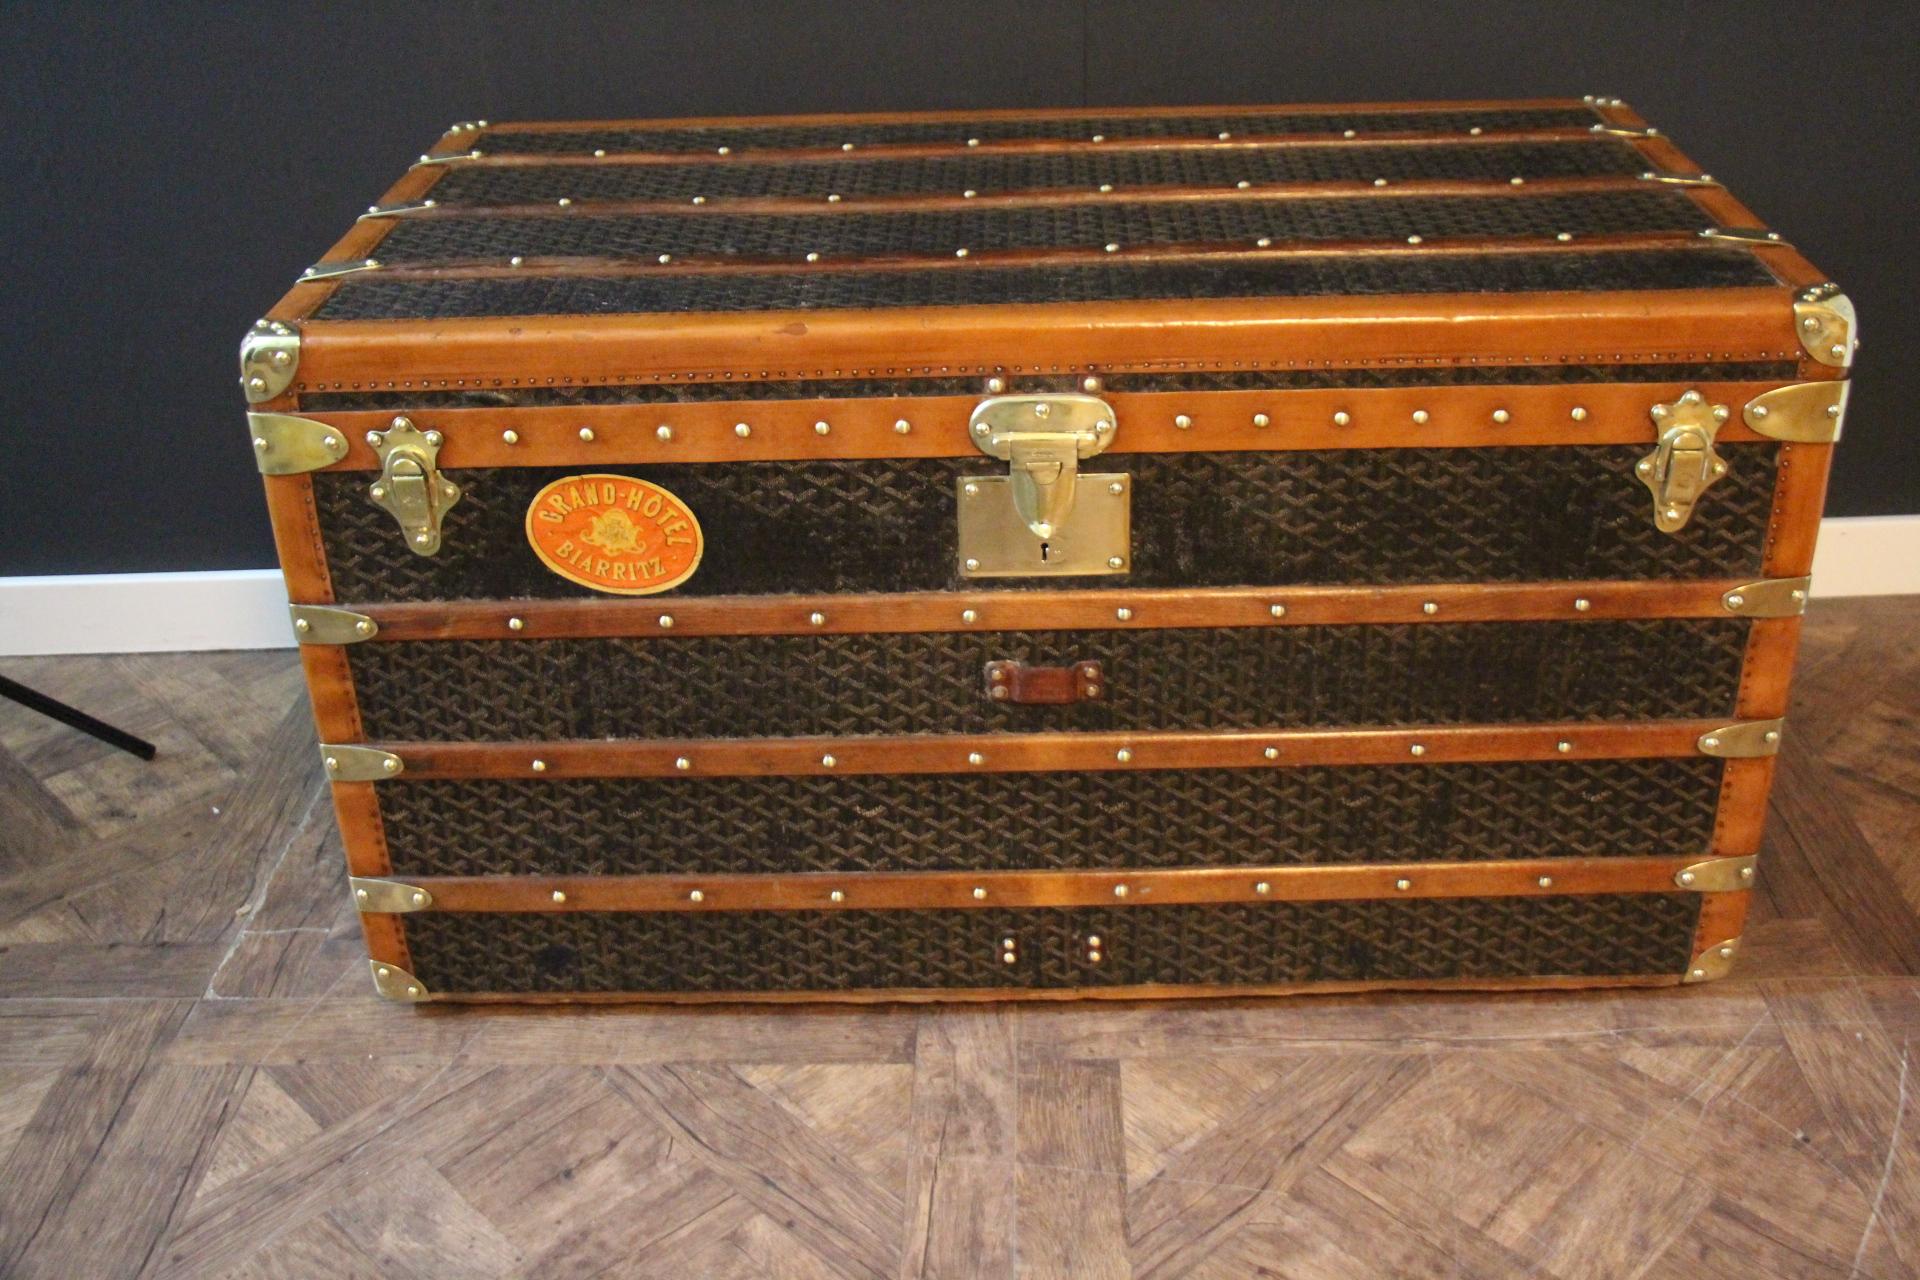 This Aine Goyard courrier trunk has got very nice proportions as well as a beautiful, warm patina.
It features its famous and sought after chevron canvas, its original solid brass Goyard stamped lock, solid brass stamped clasps and solid brass